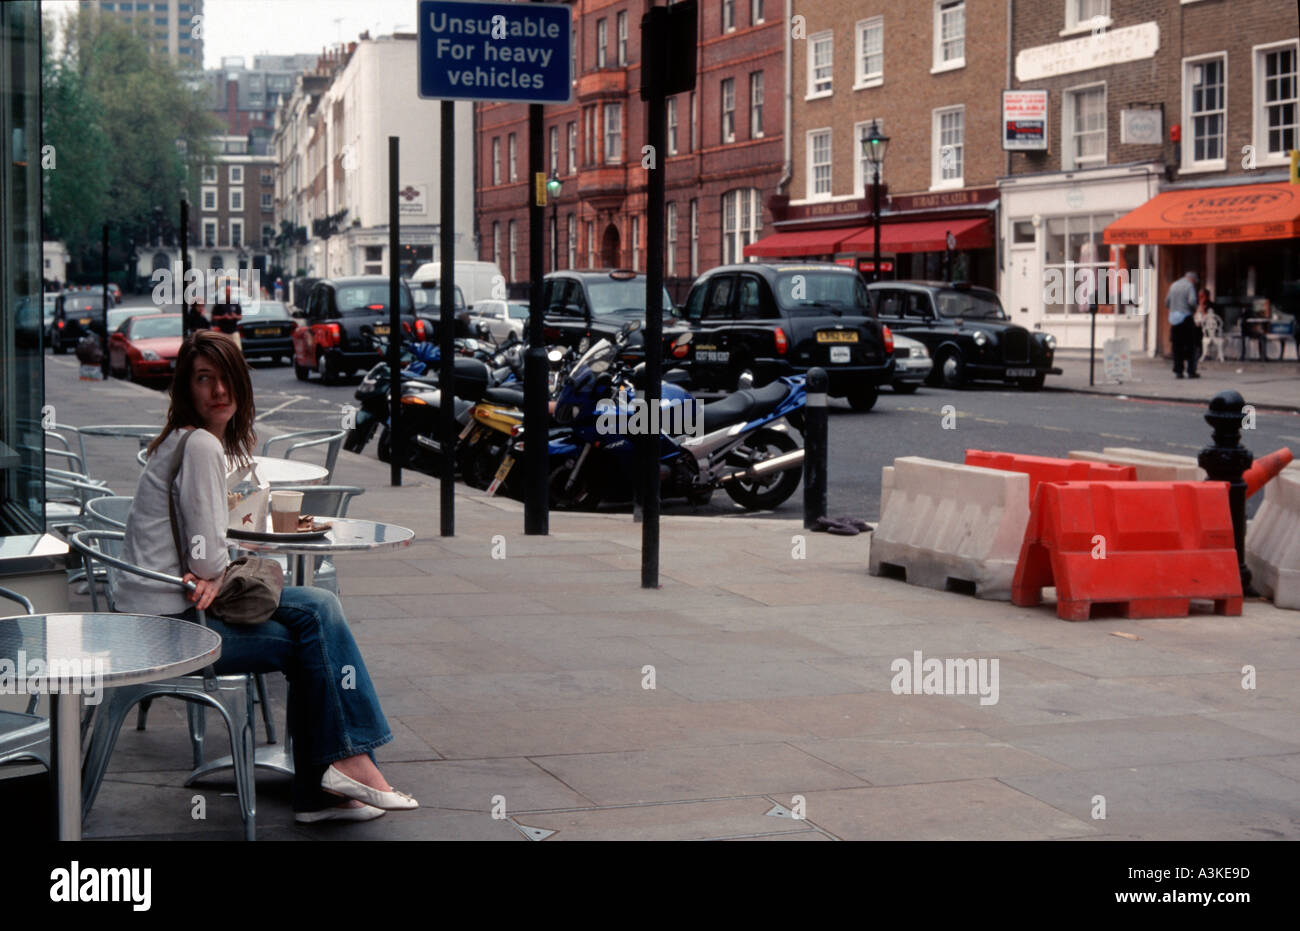 Ordinary street scene in London England with taxis parked motorcycles road works and a woman sitting at an outside cafe table Stock Photo